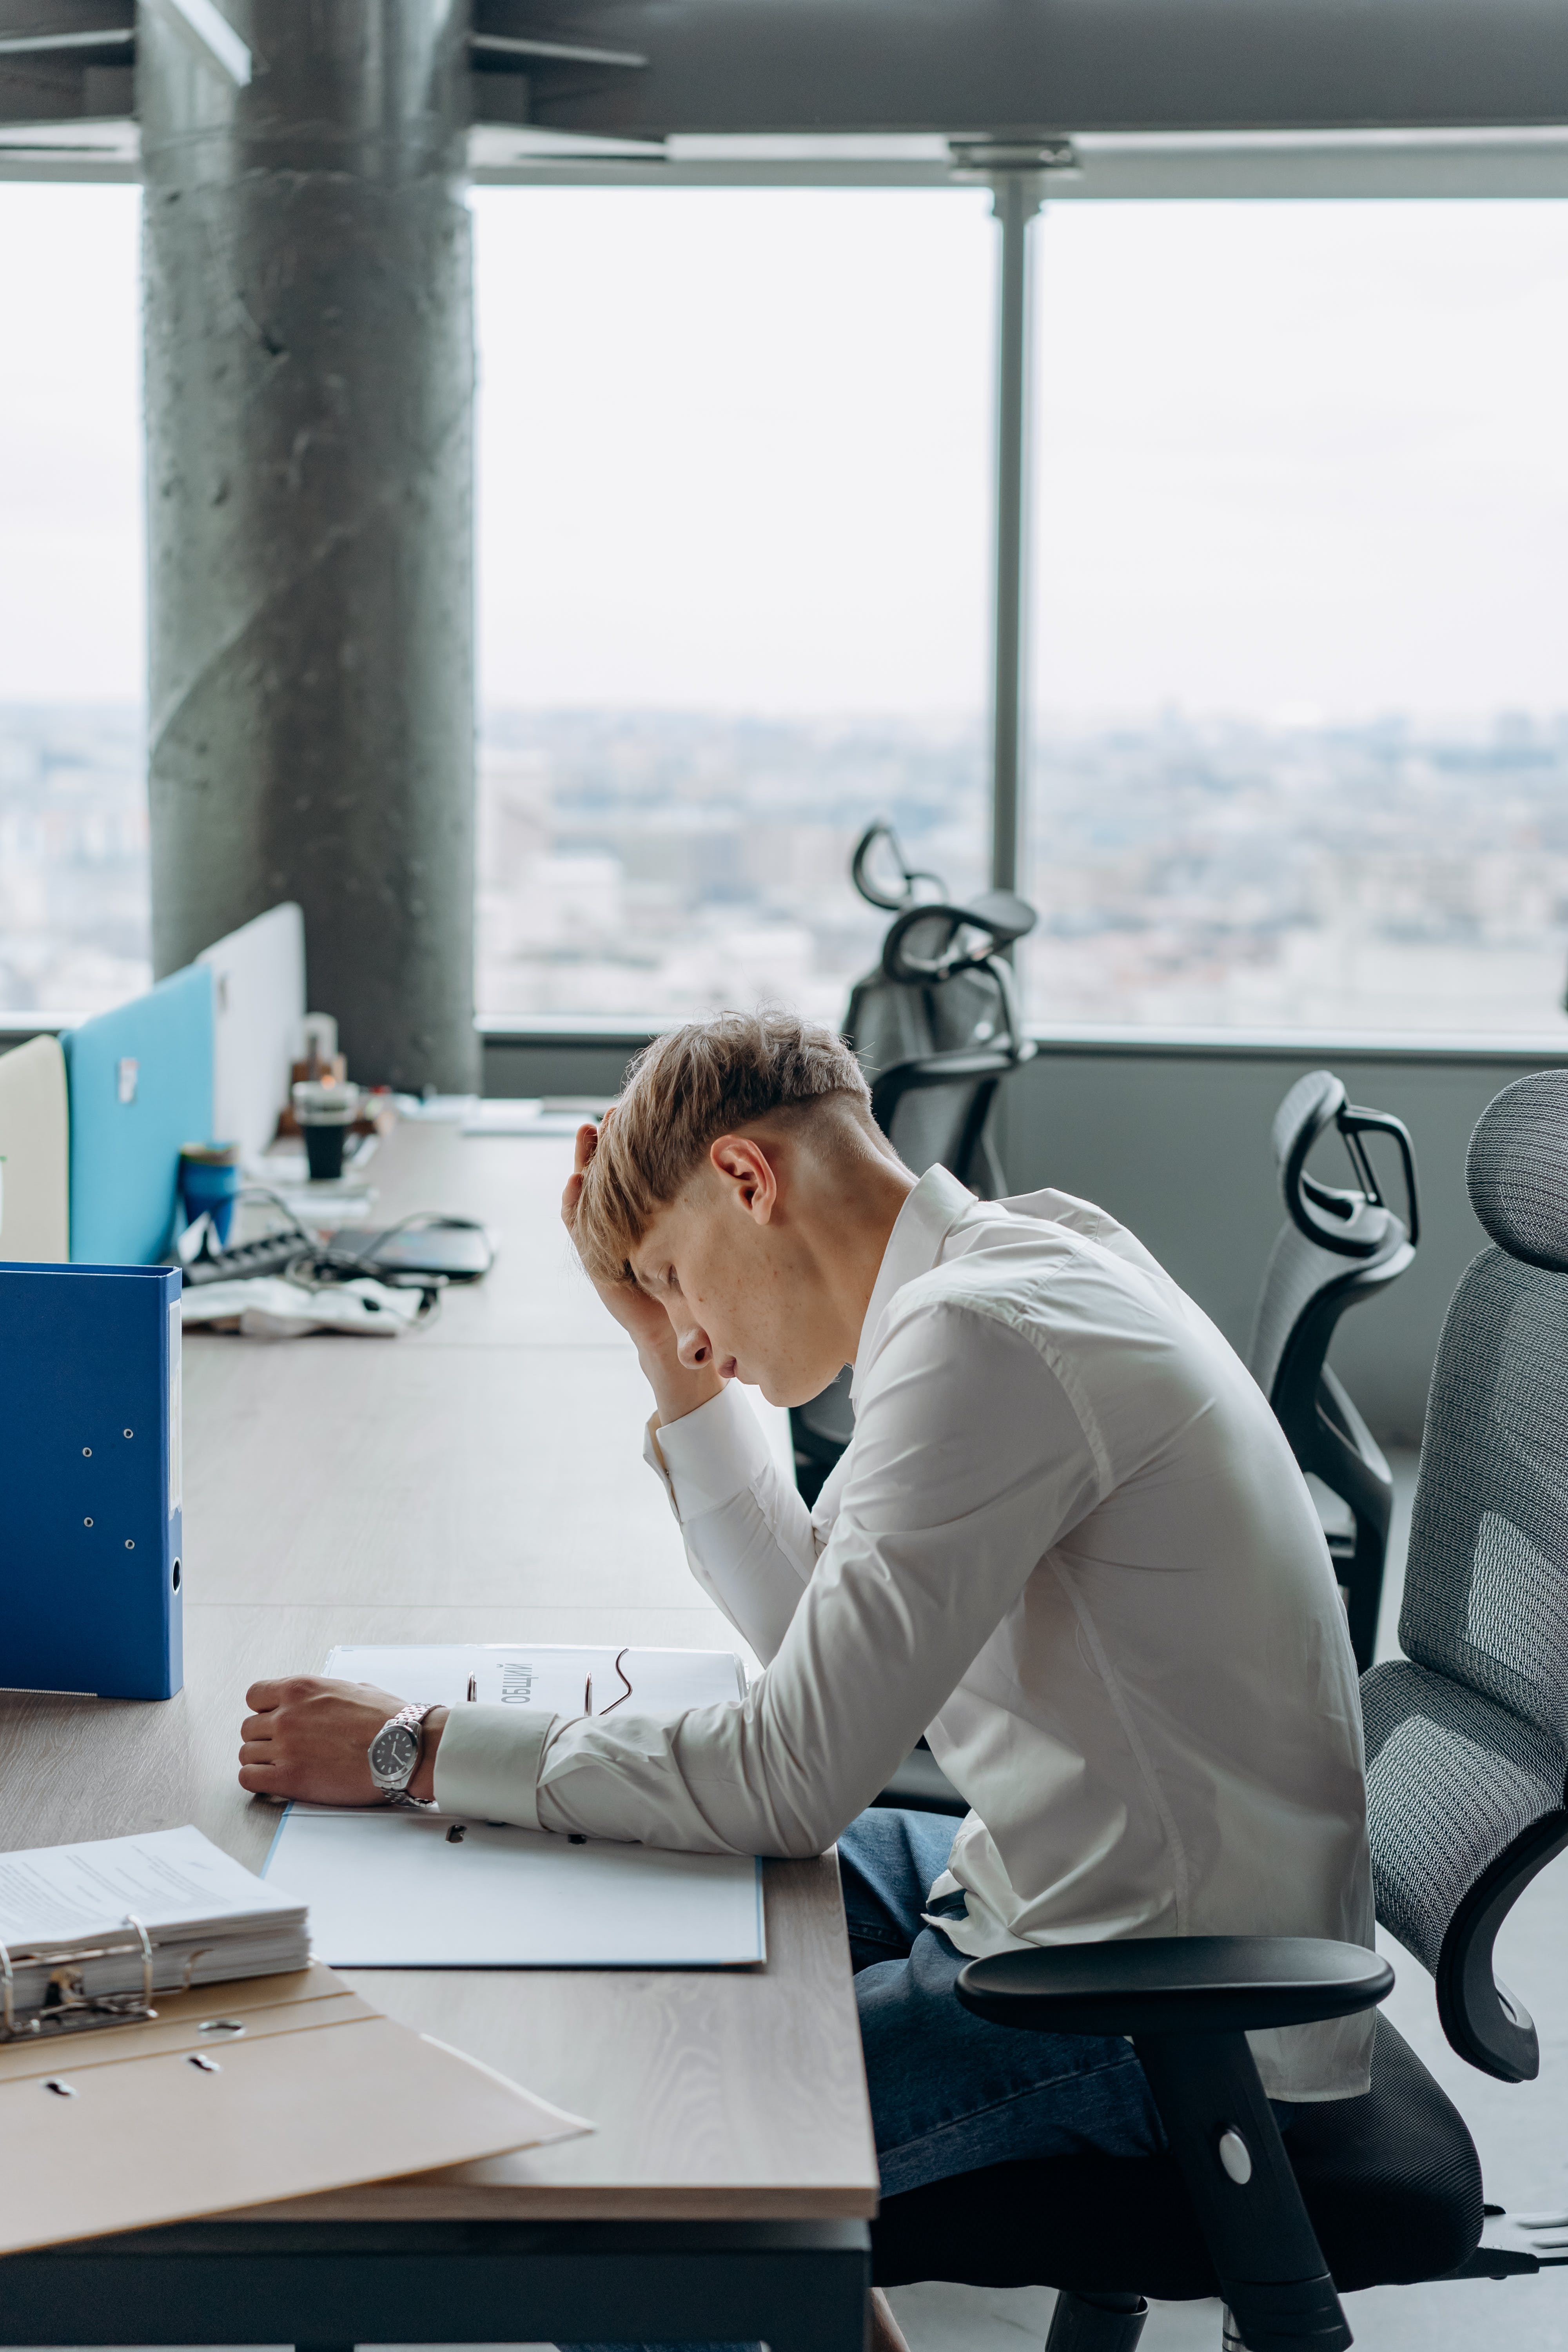 A man sitting with his hand on his head at the office | Source: Pexels